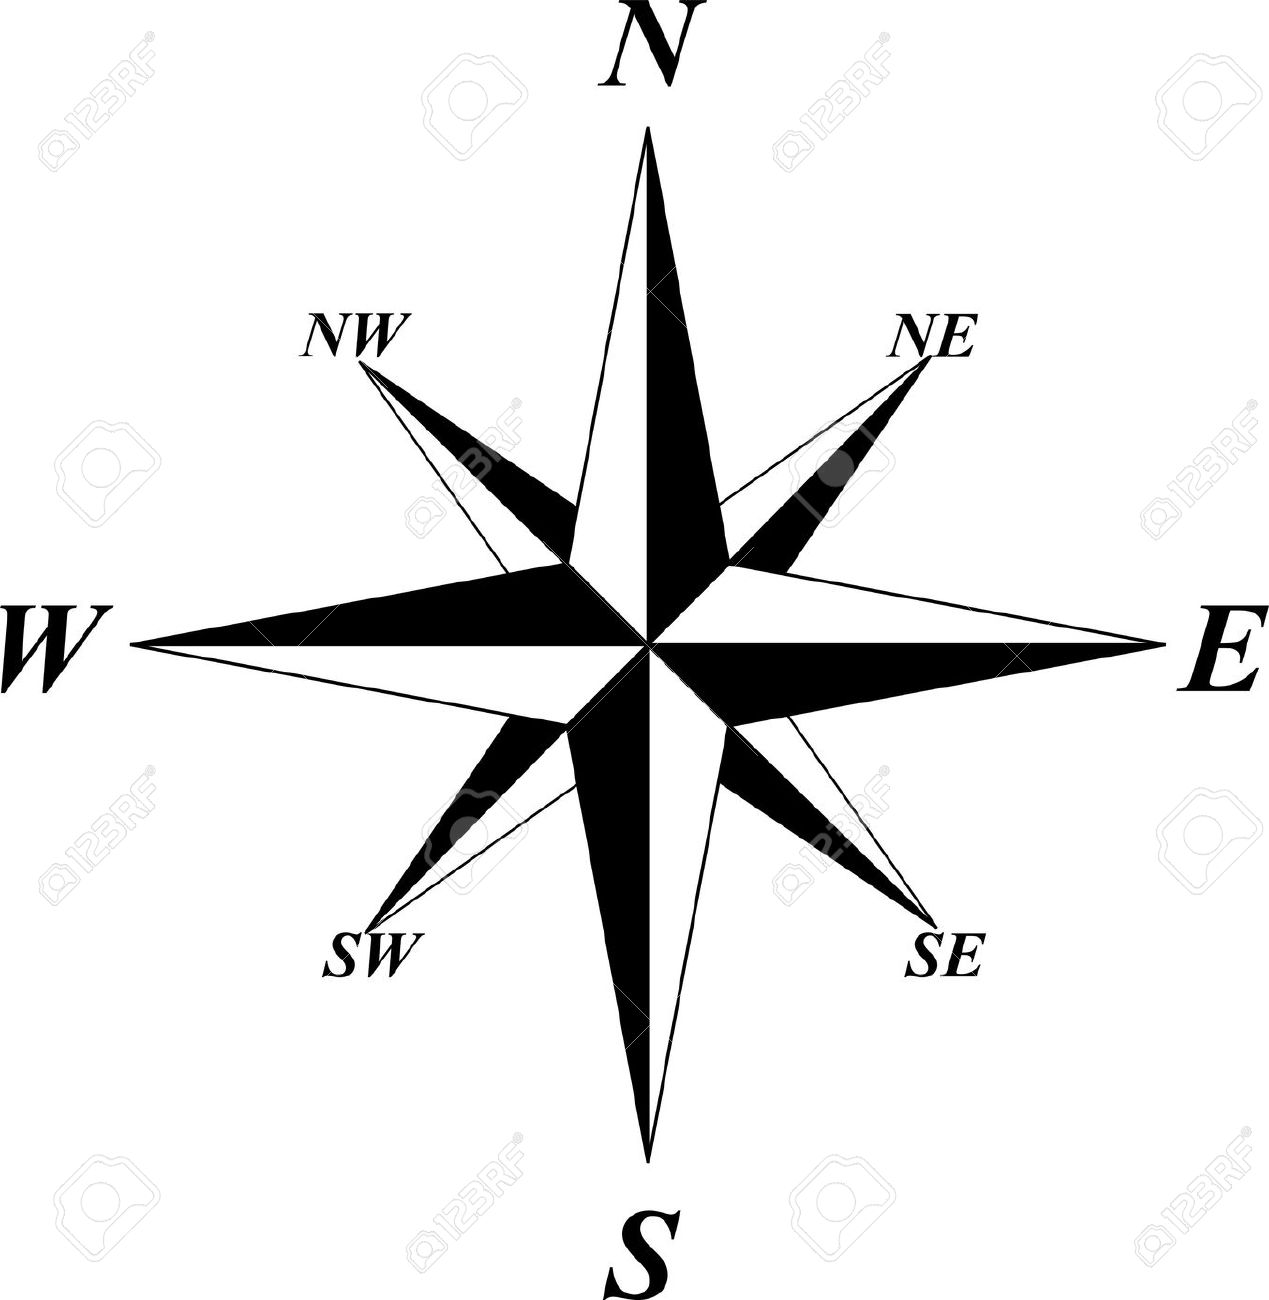 clipart wind rose - photo #40